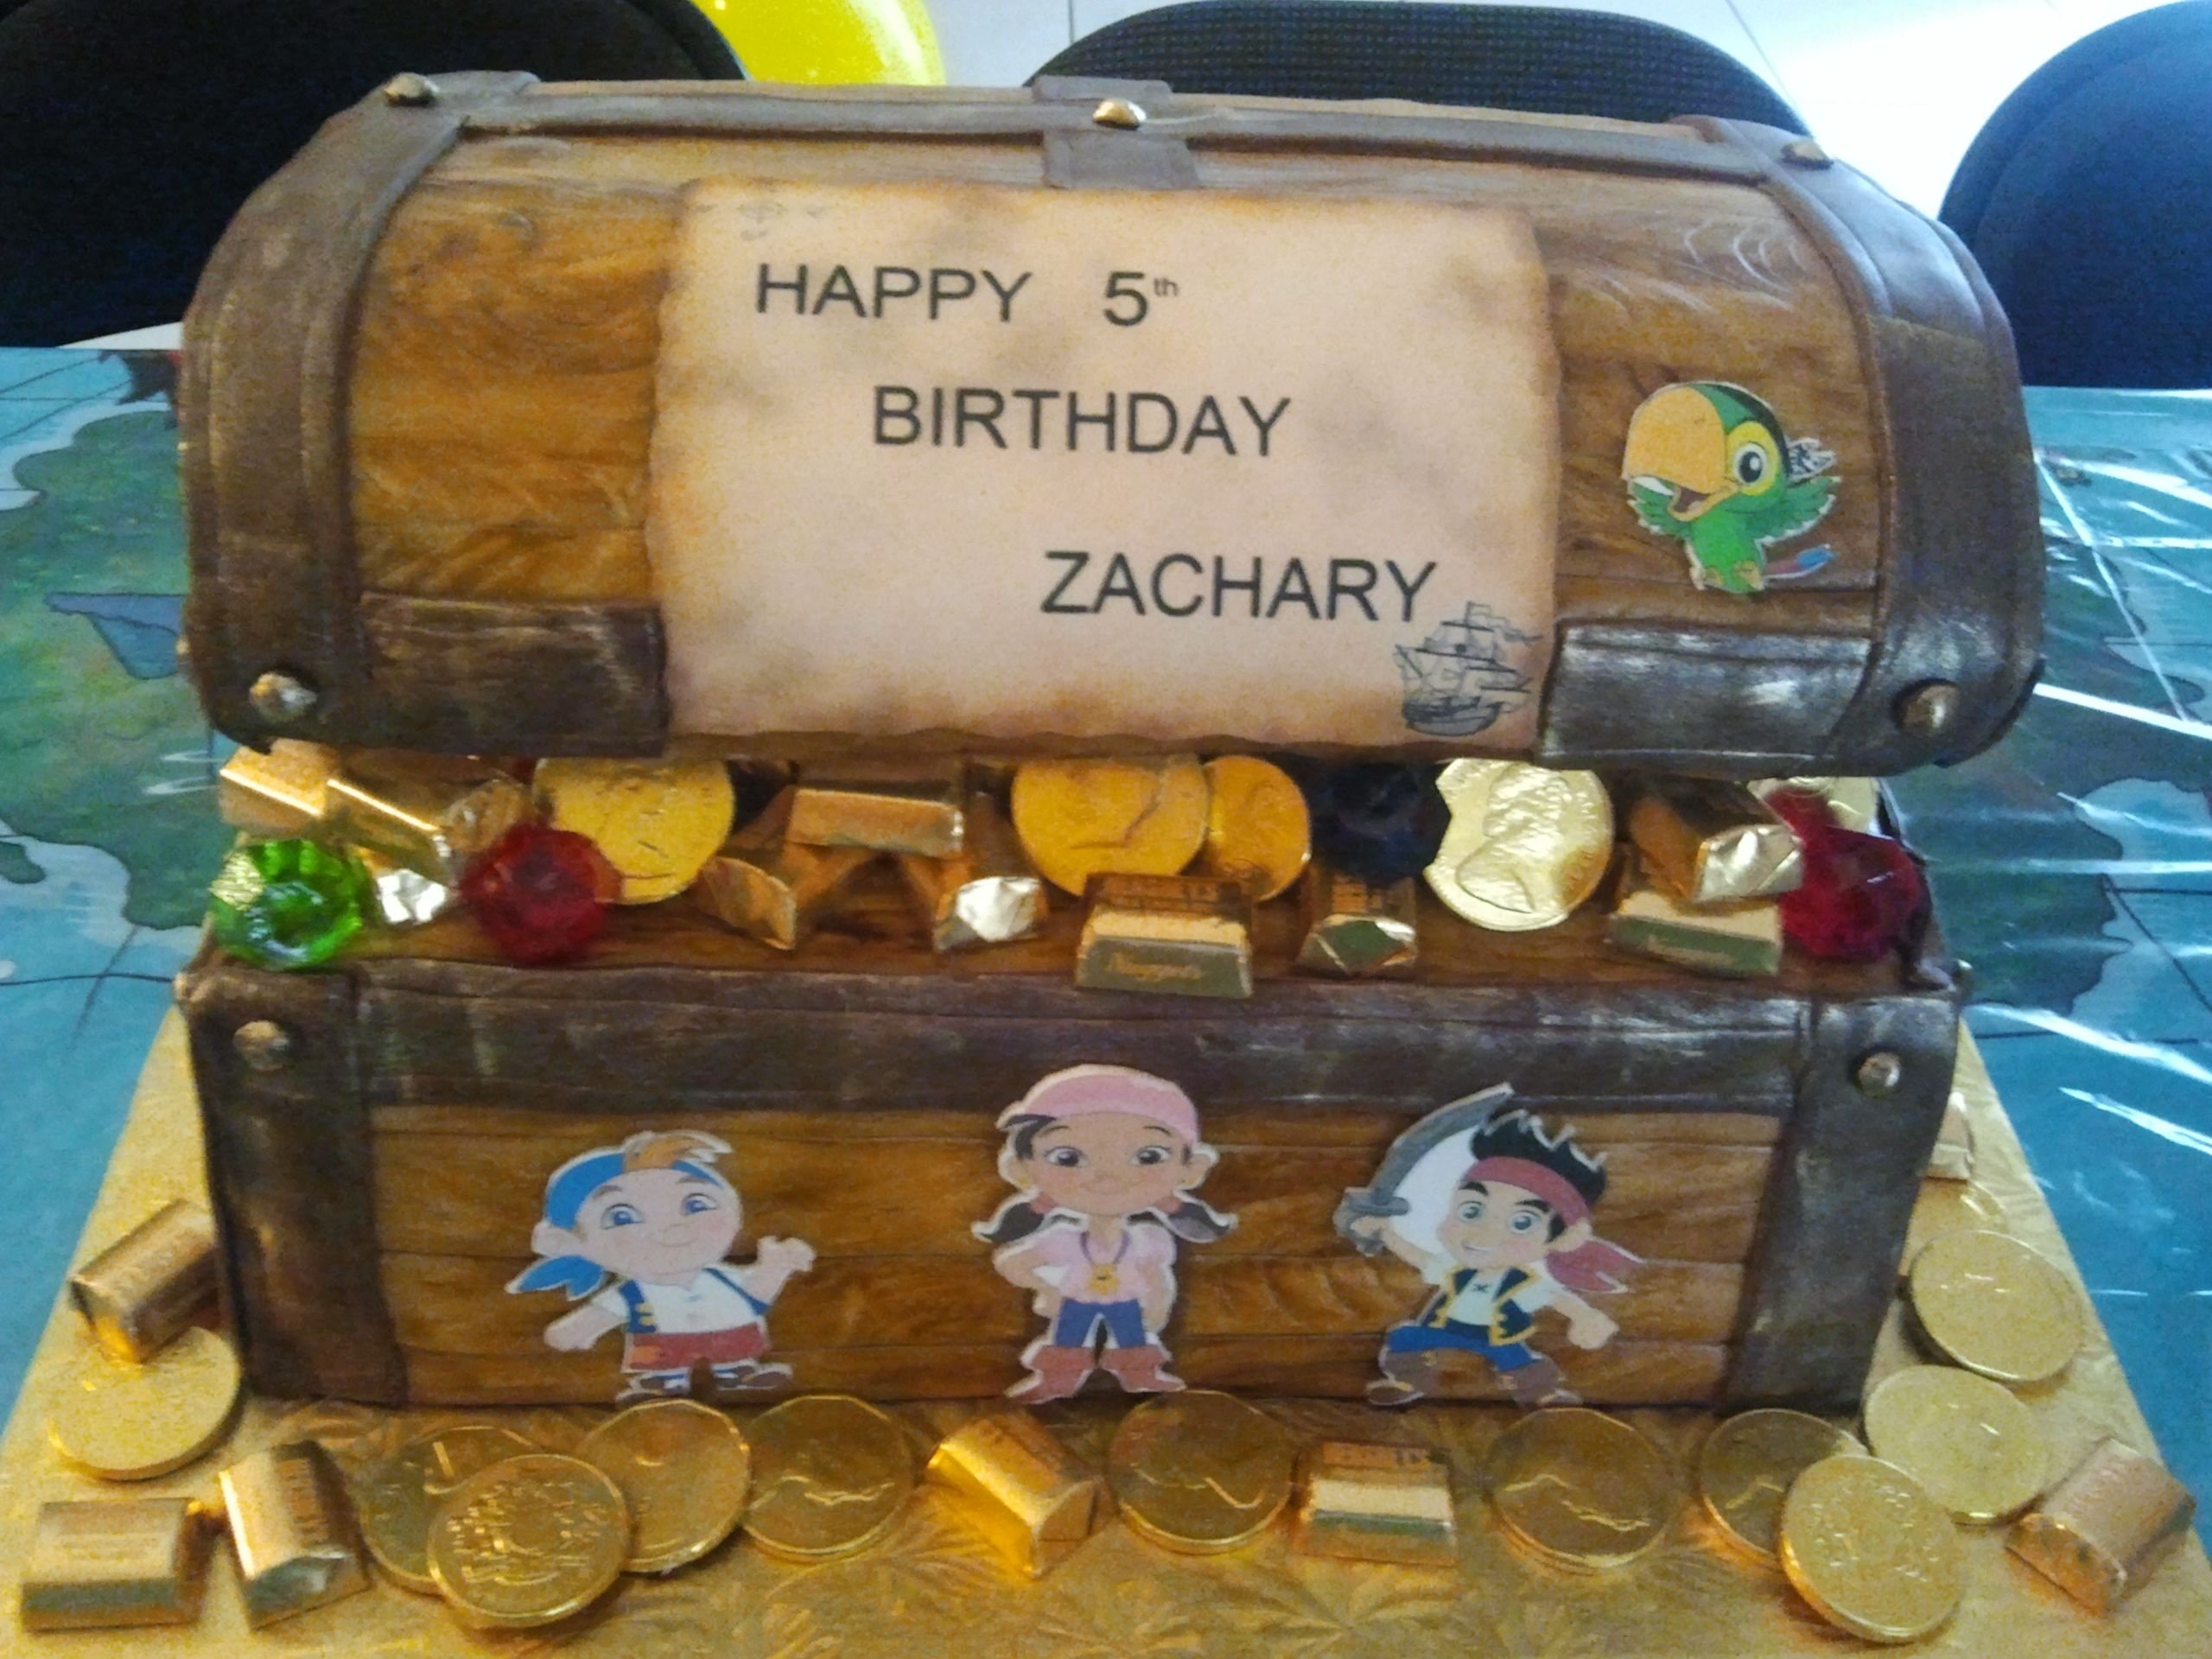 10 Gorgeous Jake And The Neverland Pirates Party Ideas jake and the neverland pirates cake cute idea for party favors and 2 2022